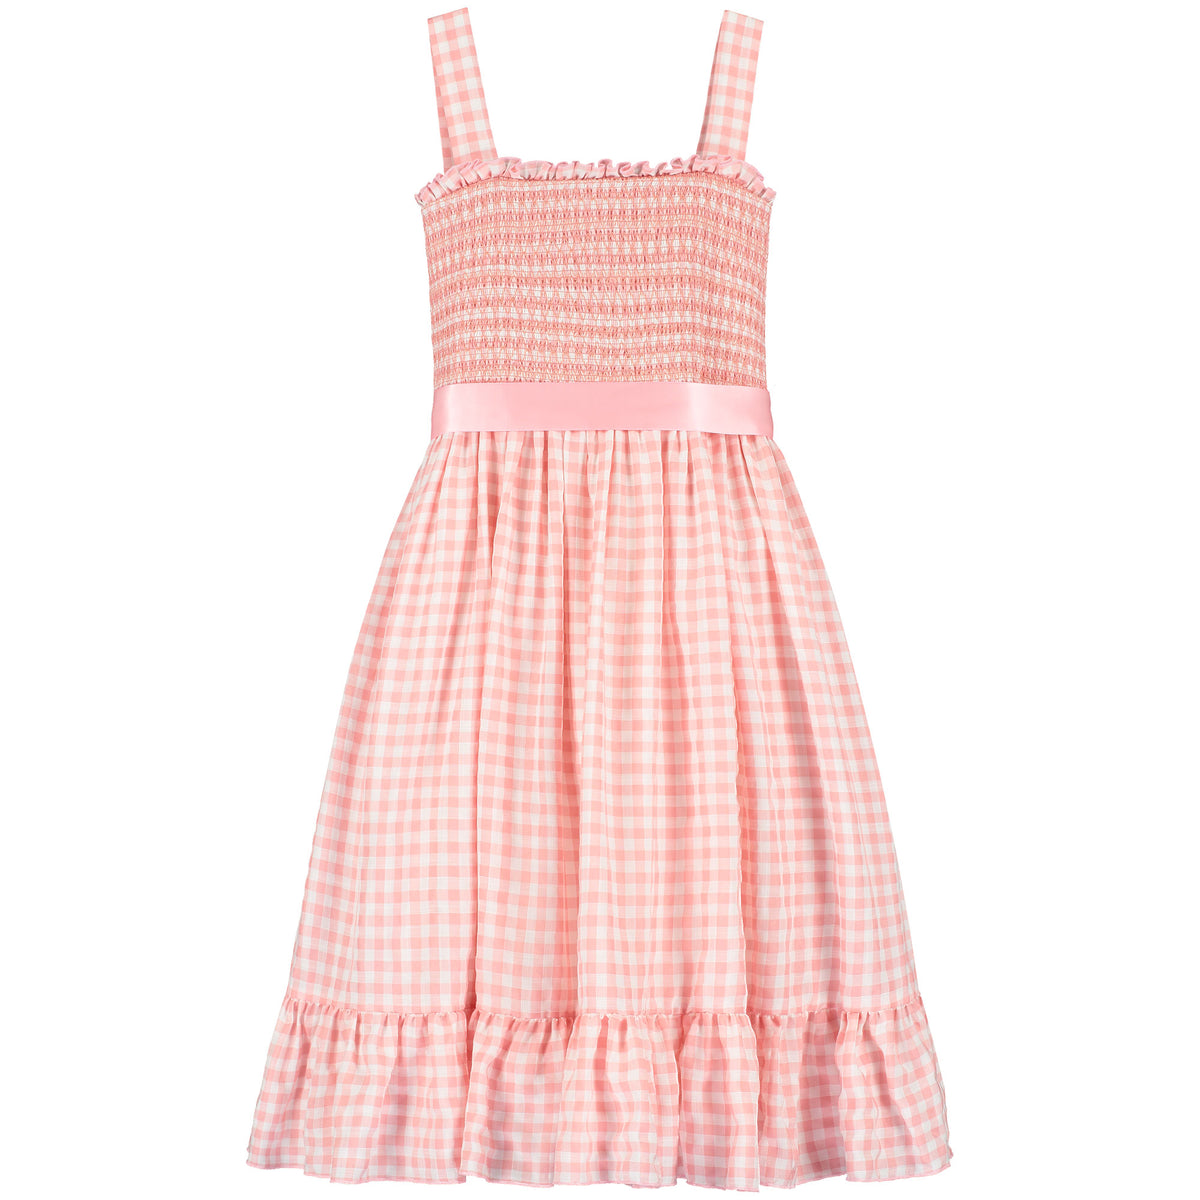 Smocked & Embroidered Gingham Check Girls Party Dress Pink | Holly Hastie London